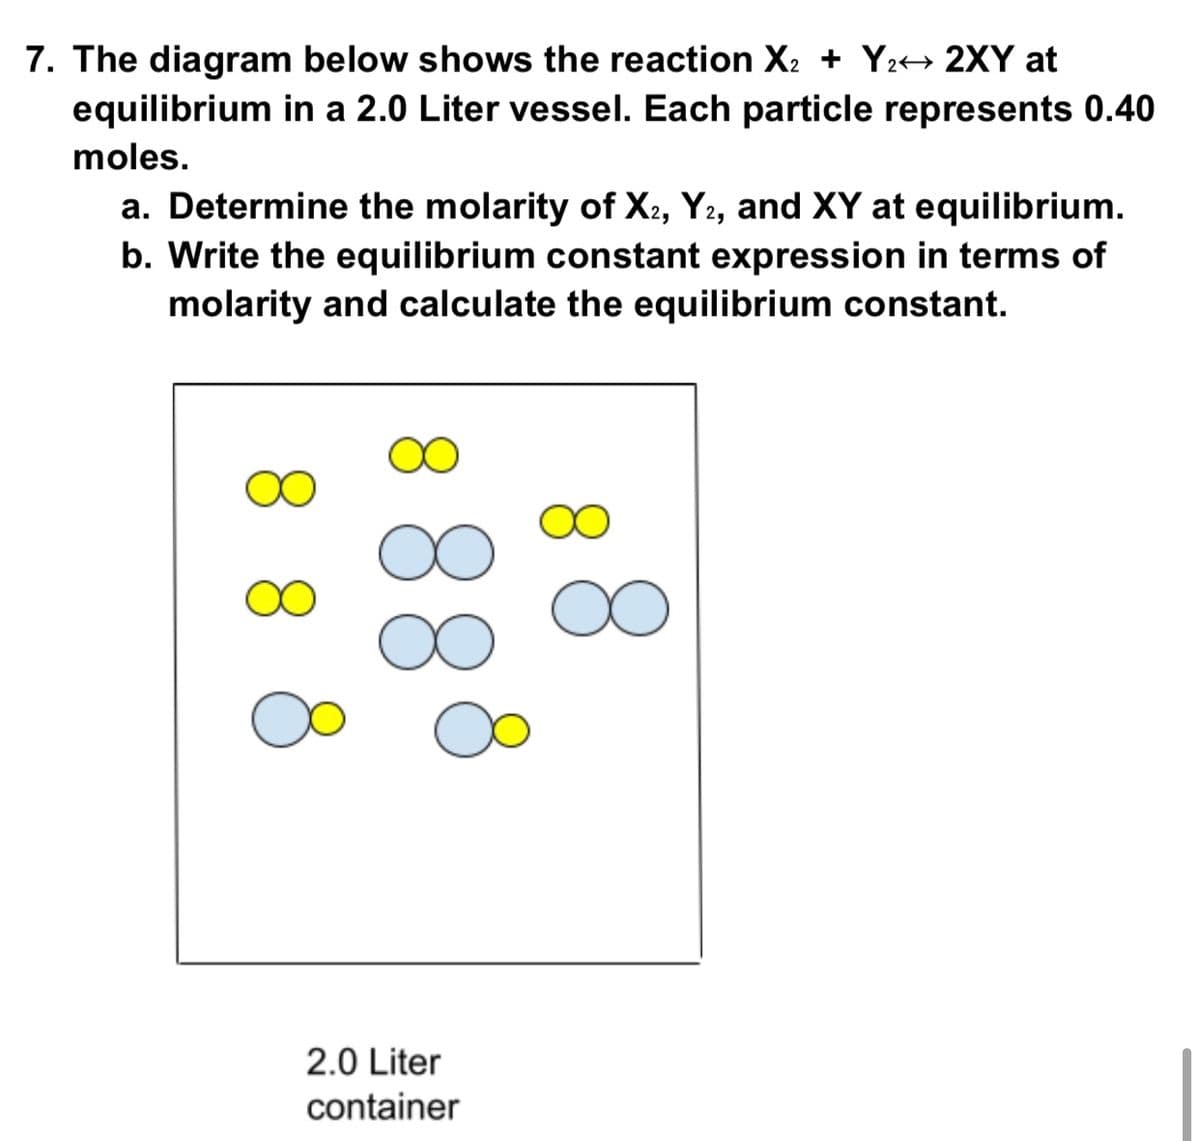 7. The diagram below shows the reaction X2 + Y2→ 2XY at
equilibrium in a 2.0 Liter vessel. Each particle represents 0.40
moles.
a. Determine the molarity of X2, Y2, and XY at equilibrium.
b. Write the equilibrium constant expression in terms of
molarity and calculate the equilibrium constant.
2.0 Liter
container
8.
